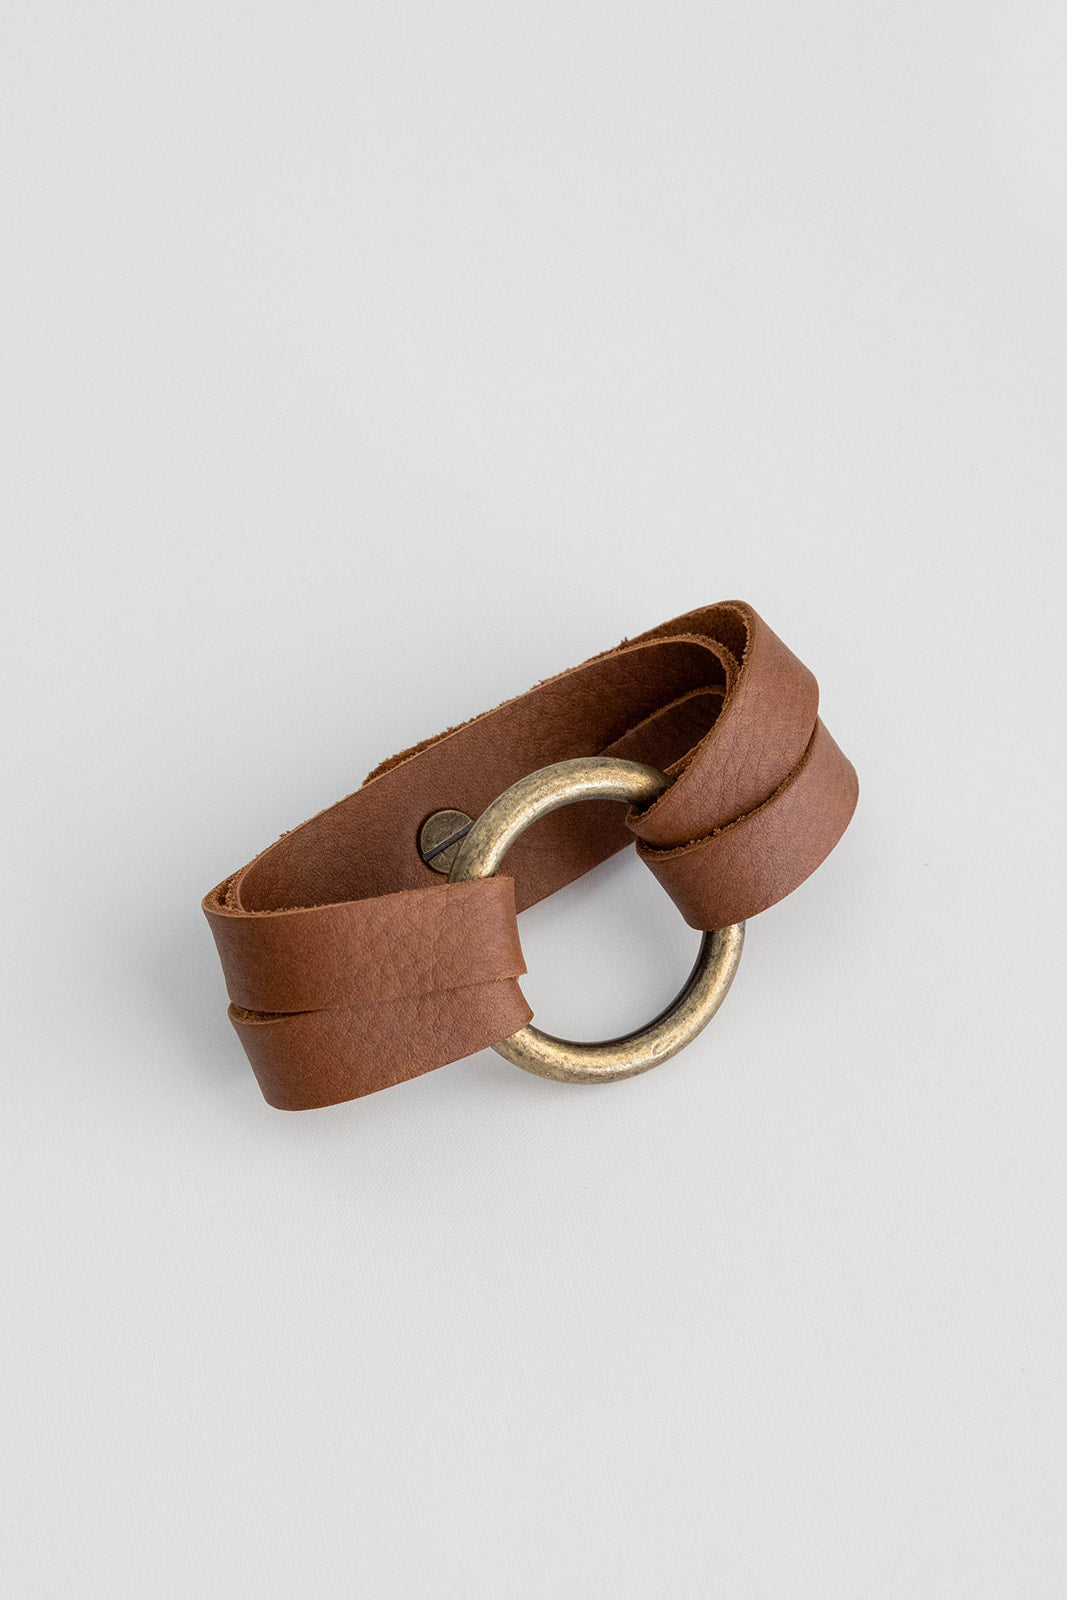 A bronze ring with leather straps connected with a knob button lays on a white background.